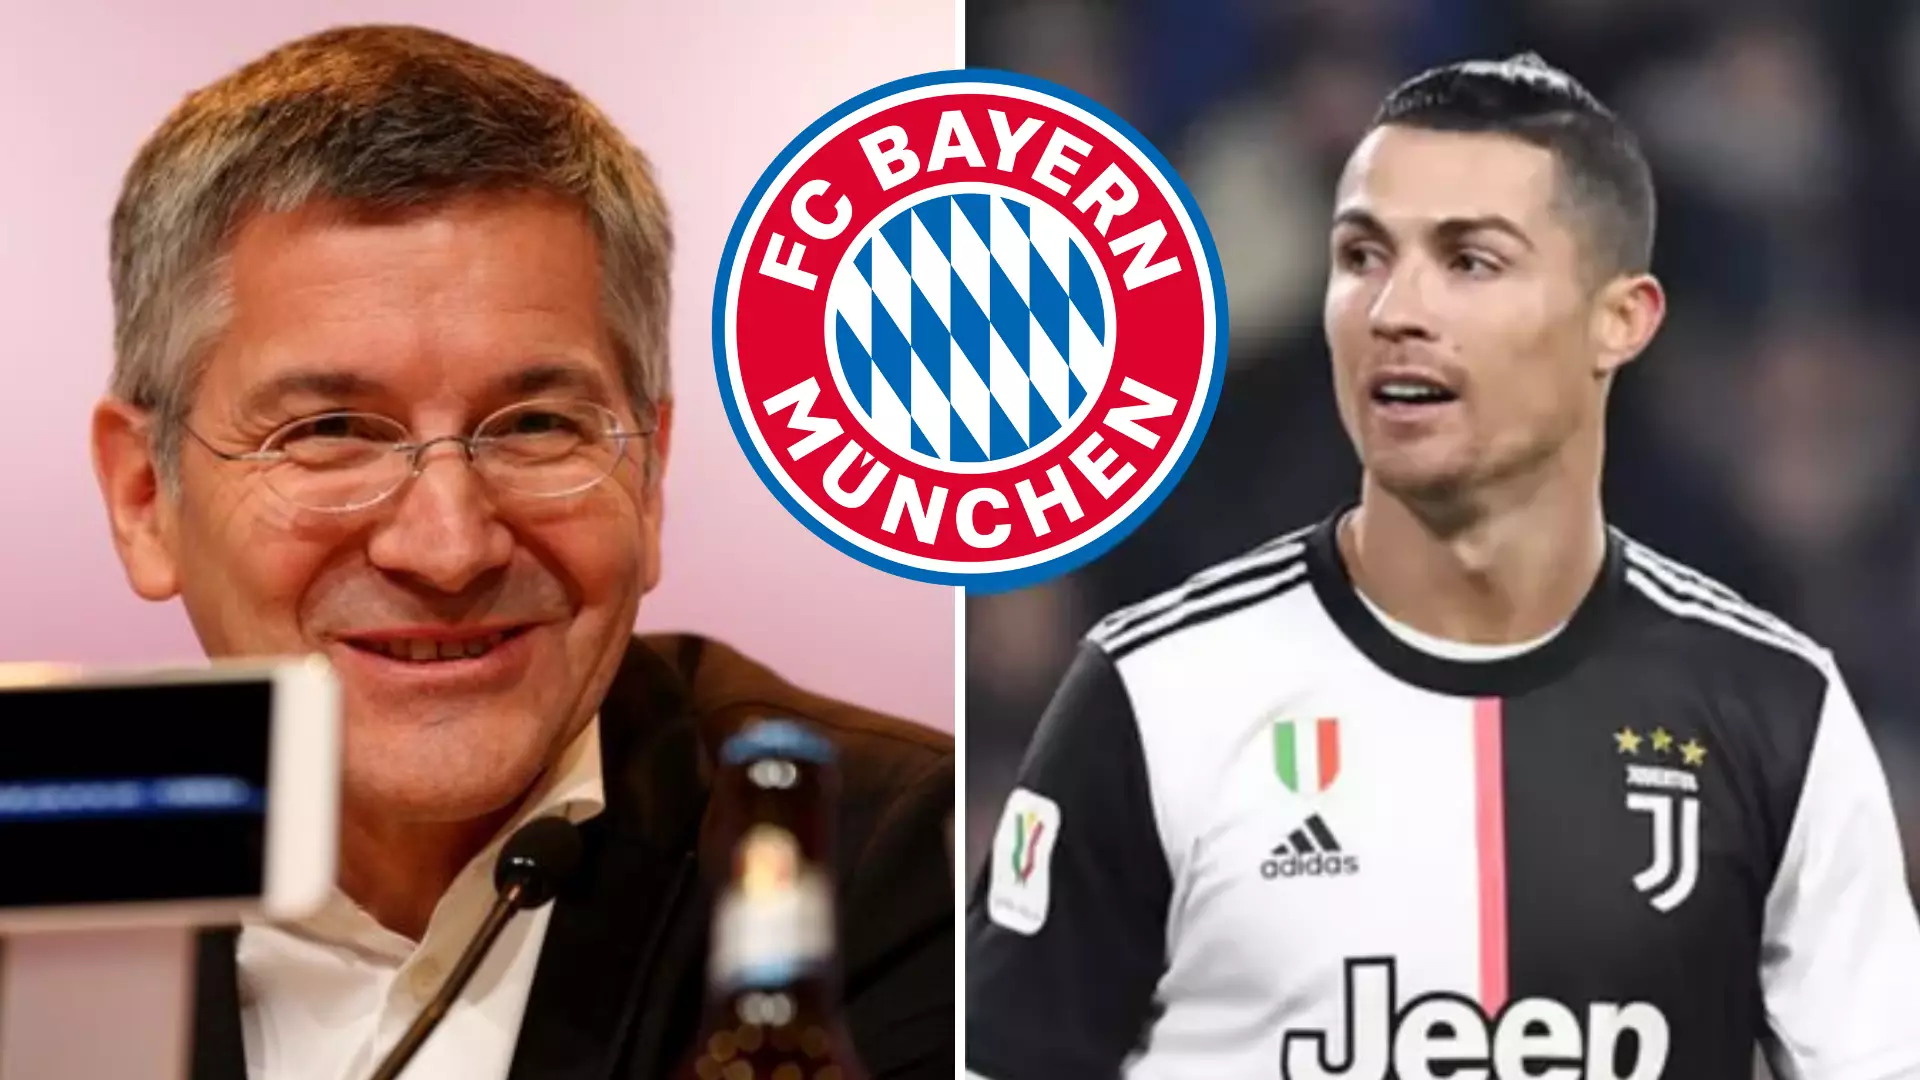 Bayern Munich President Explains Why The Club Would Not Sign Cristiano Ronaldo